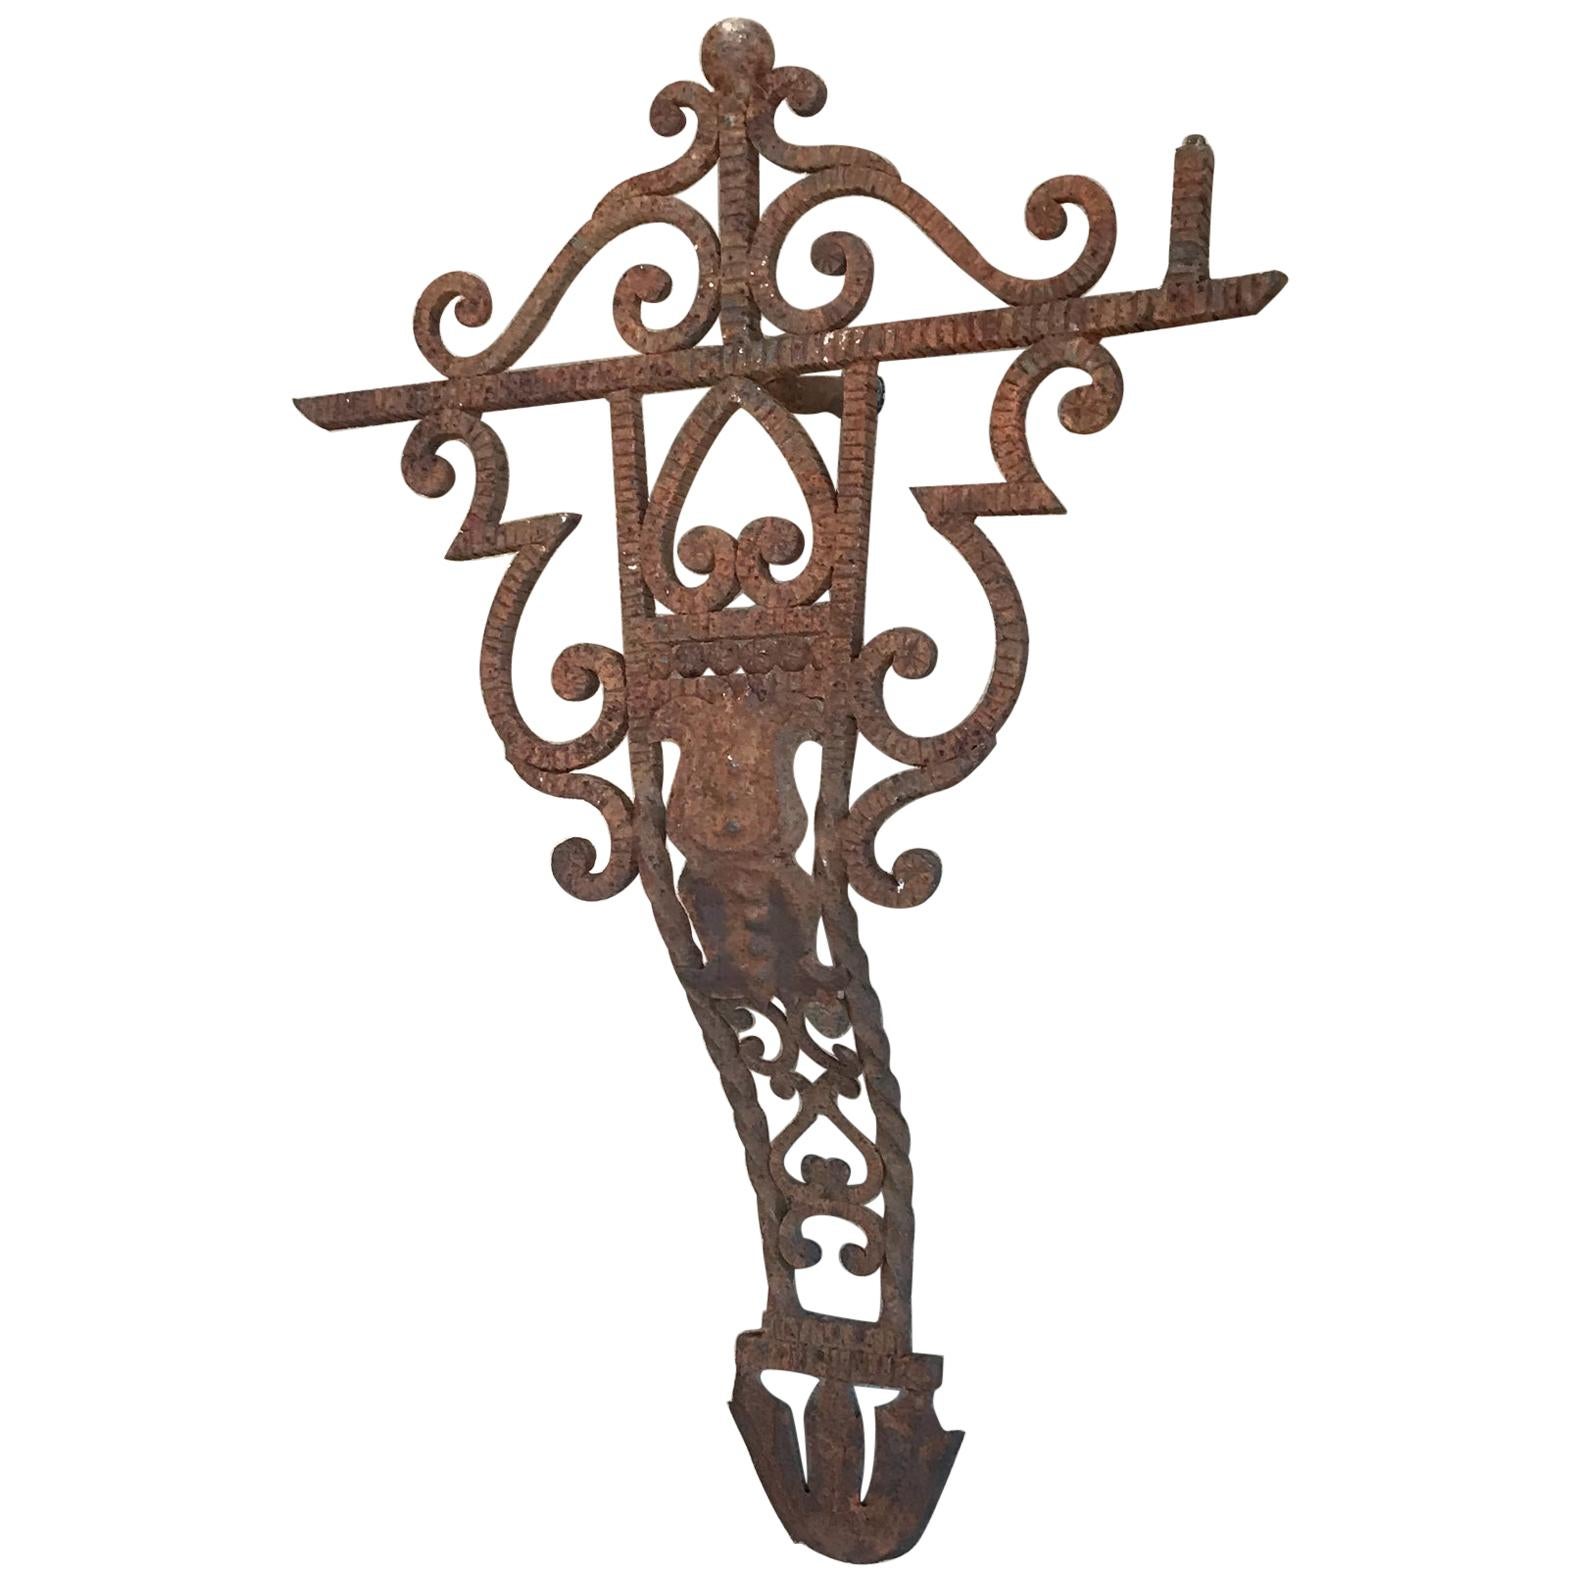  Stunning Antique Architectural Salvage Wall Cross in Forged Iron  Mexico  1920s